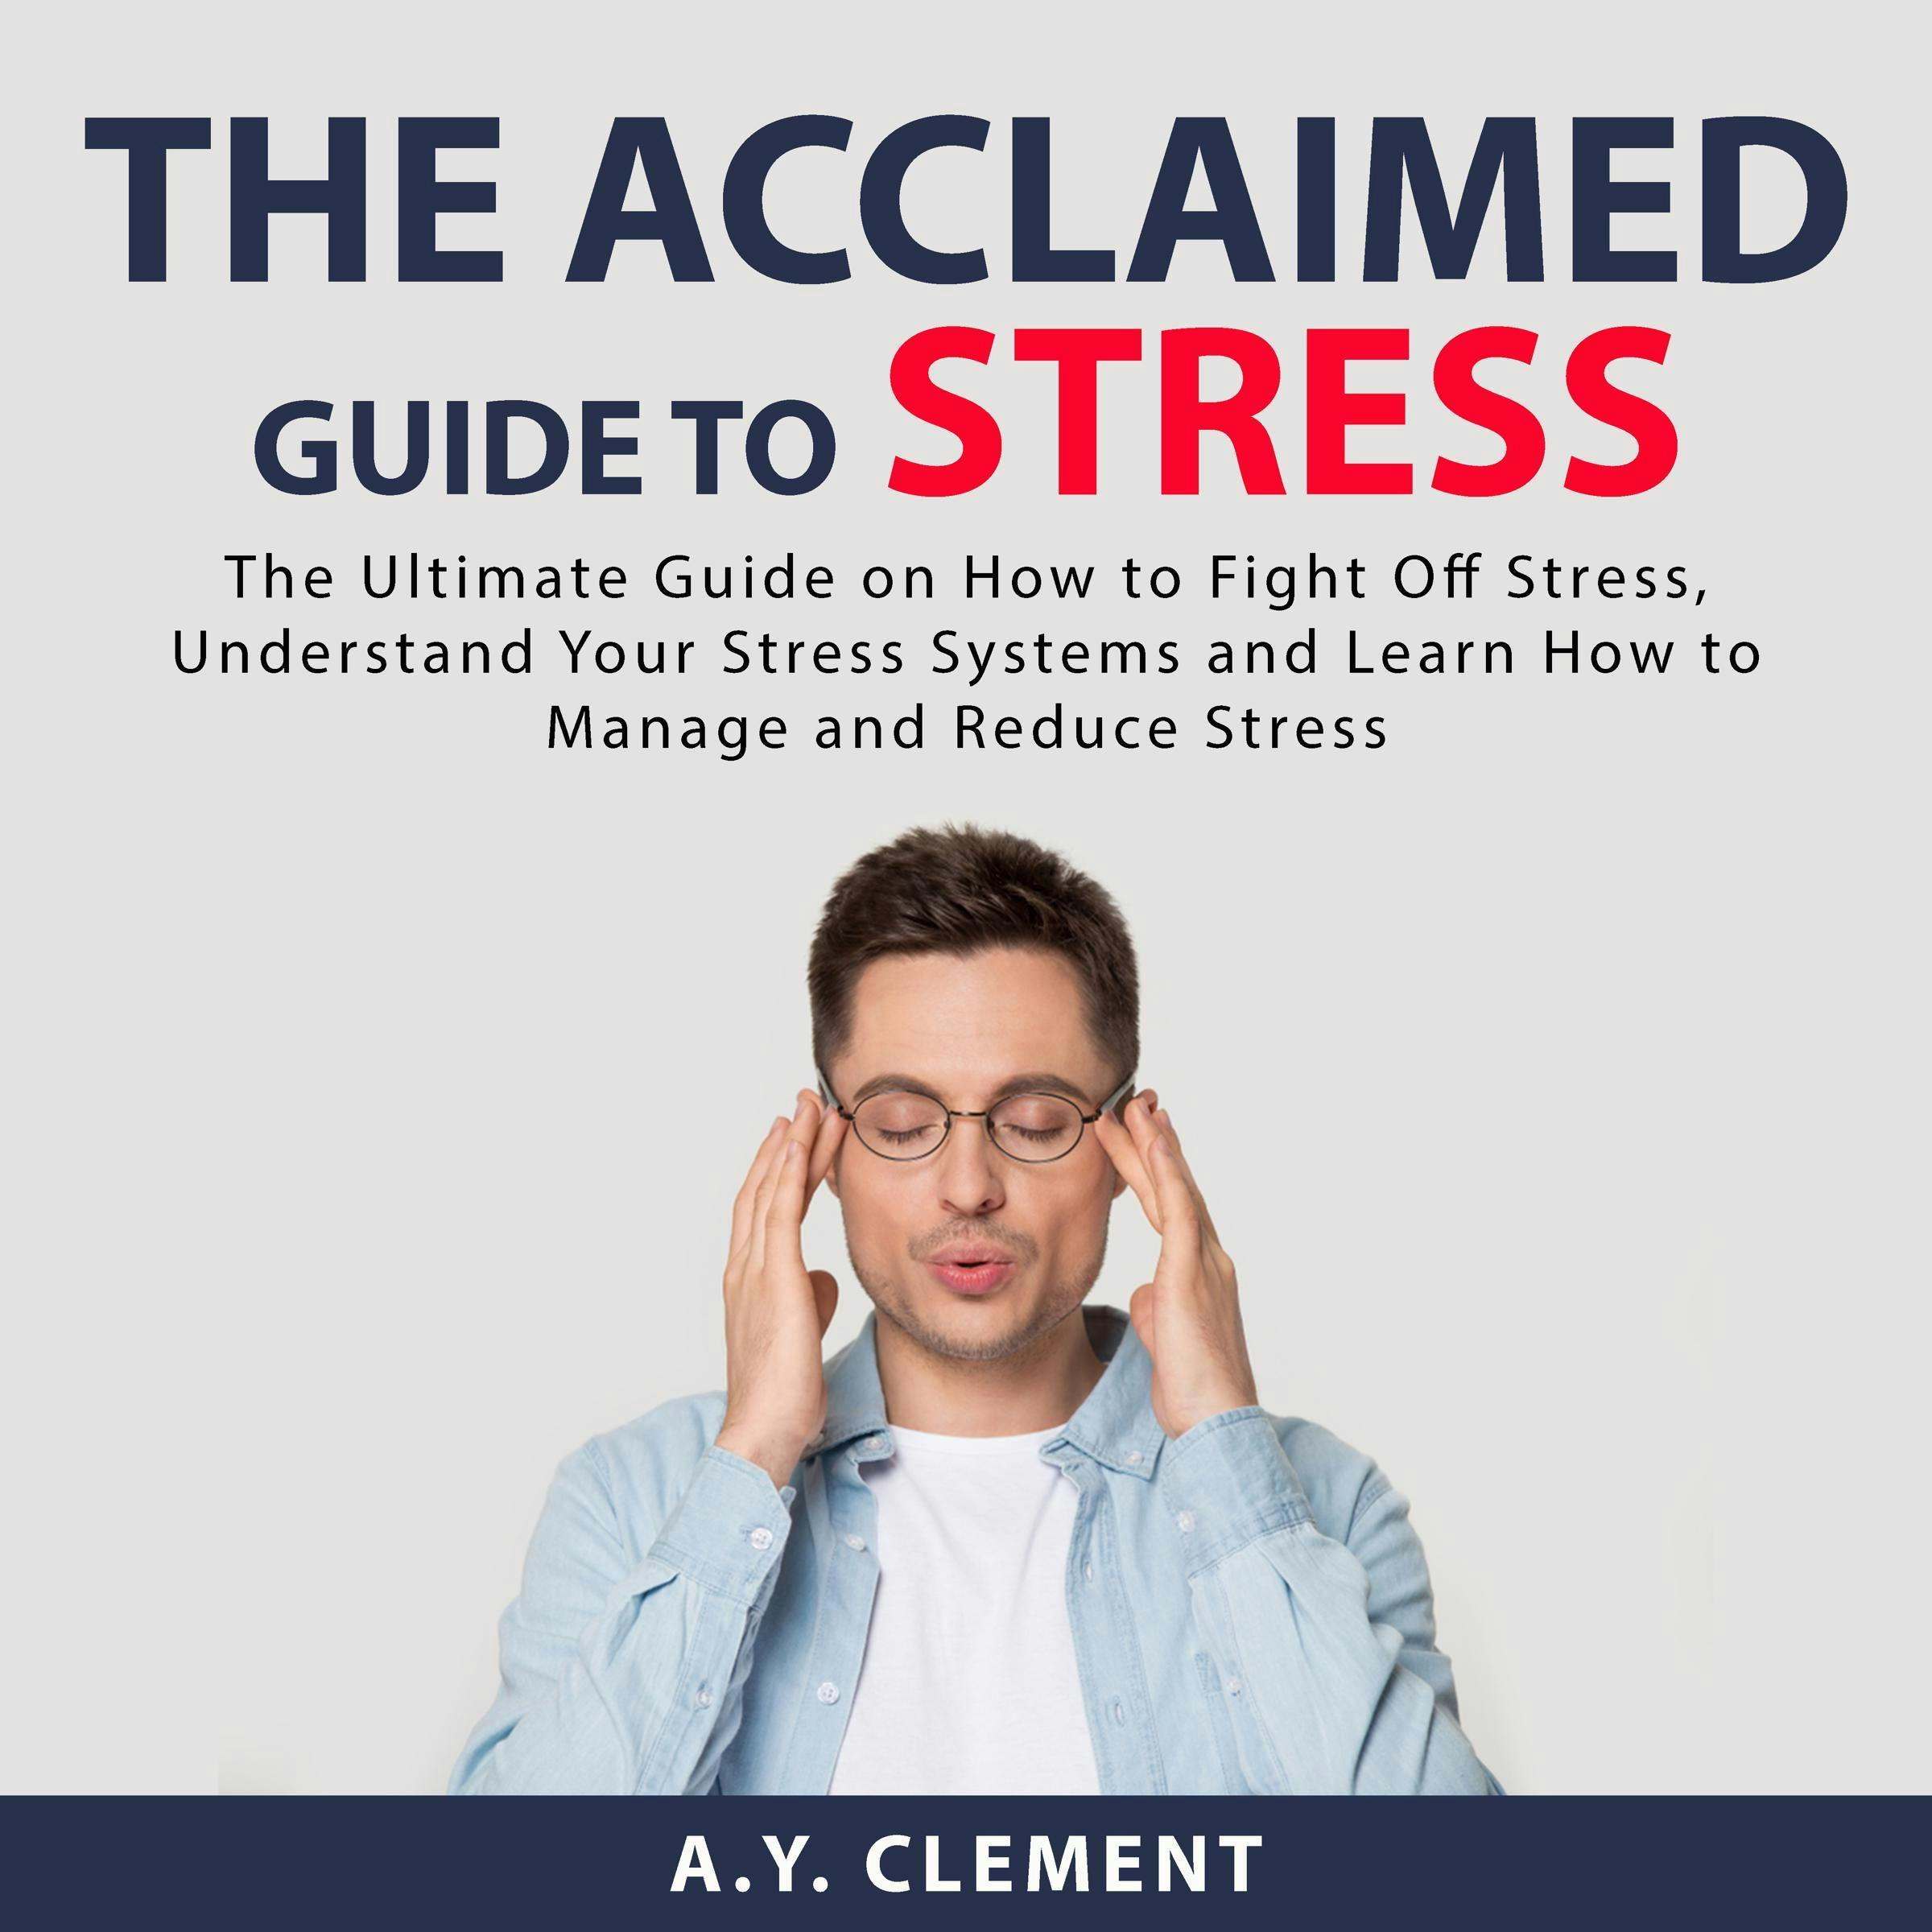 The Acclaimed Guide to Stress: The Ultimate Guide on How to Fight Off Stress, Understand Your Stress Systems and Learn How to Manage and Reduce Stress - A.Y. Clement